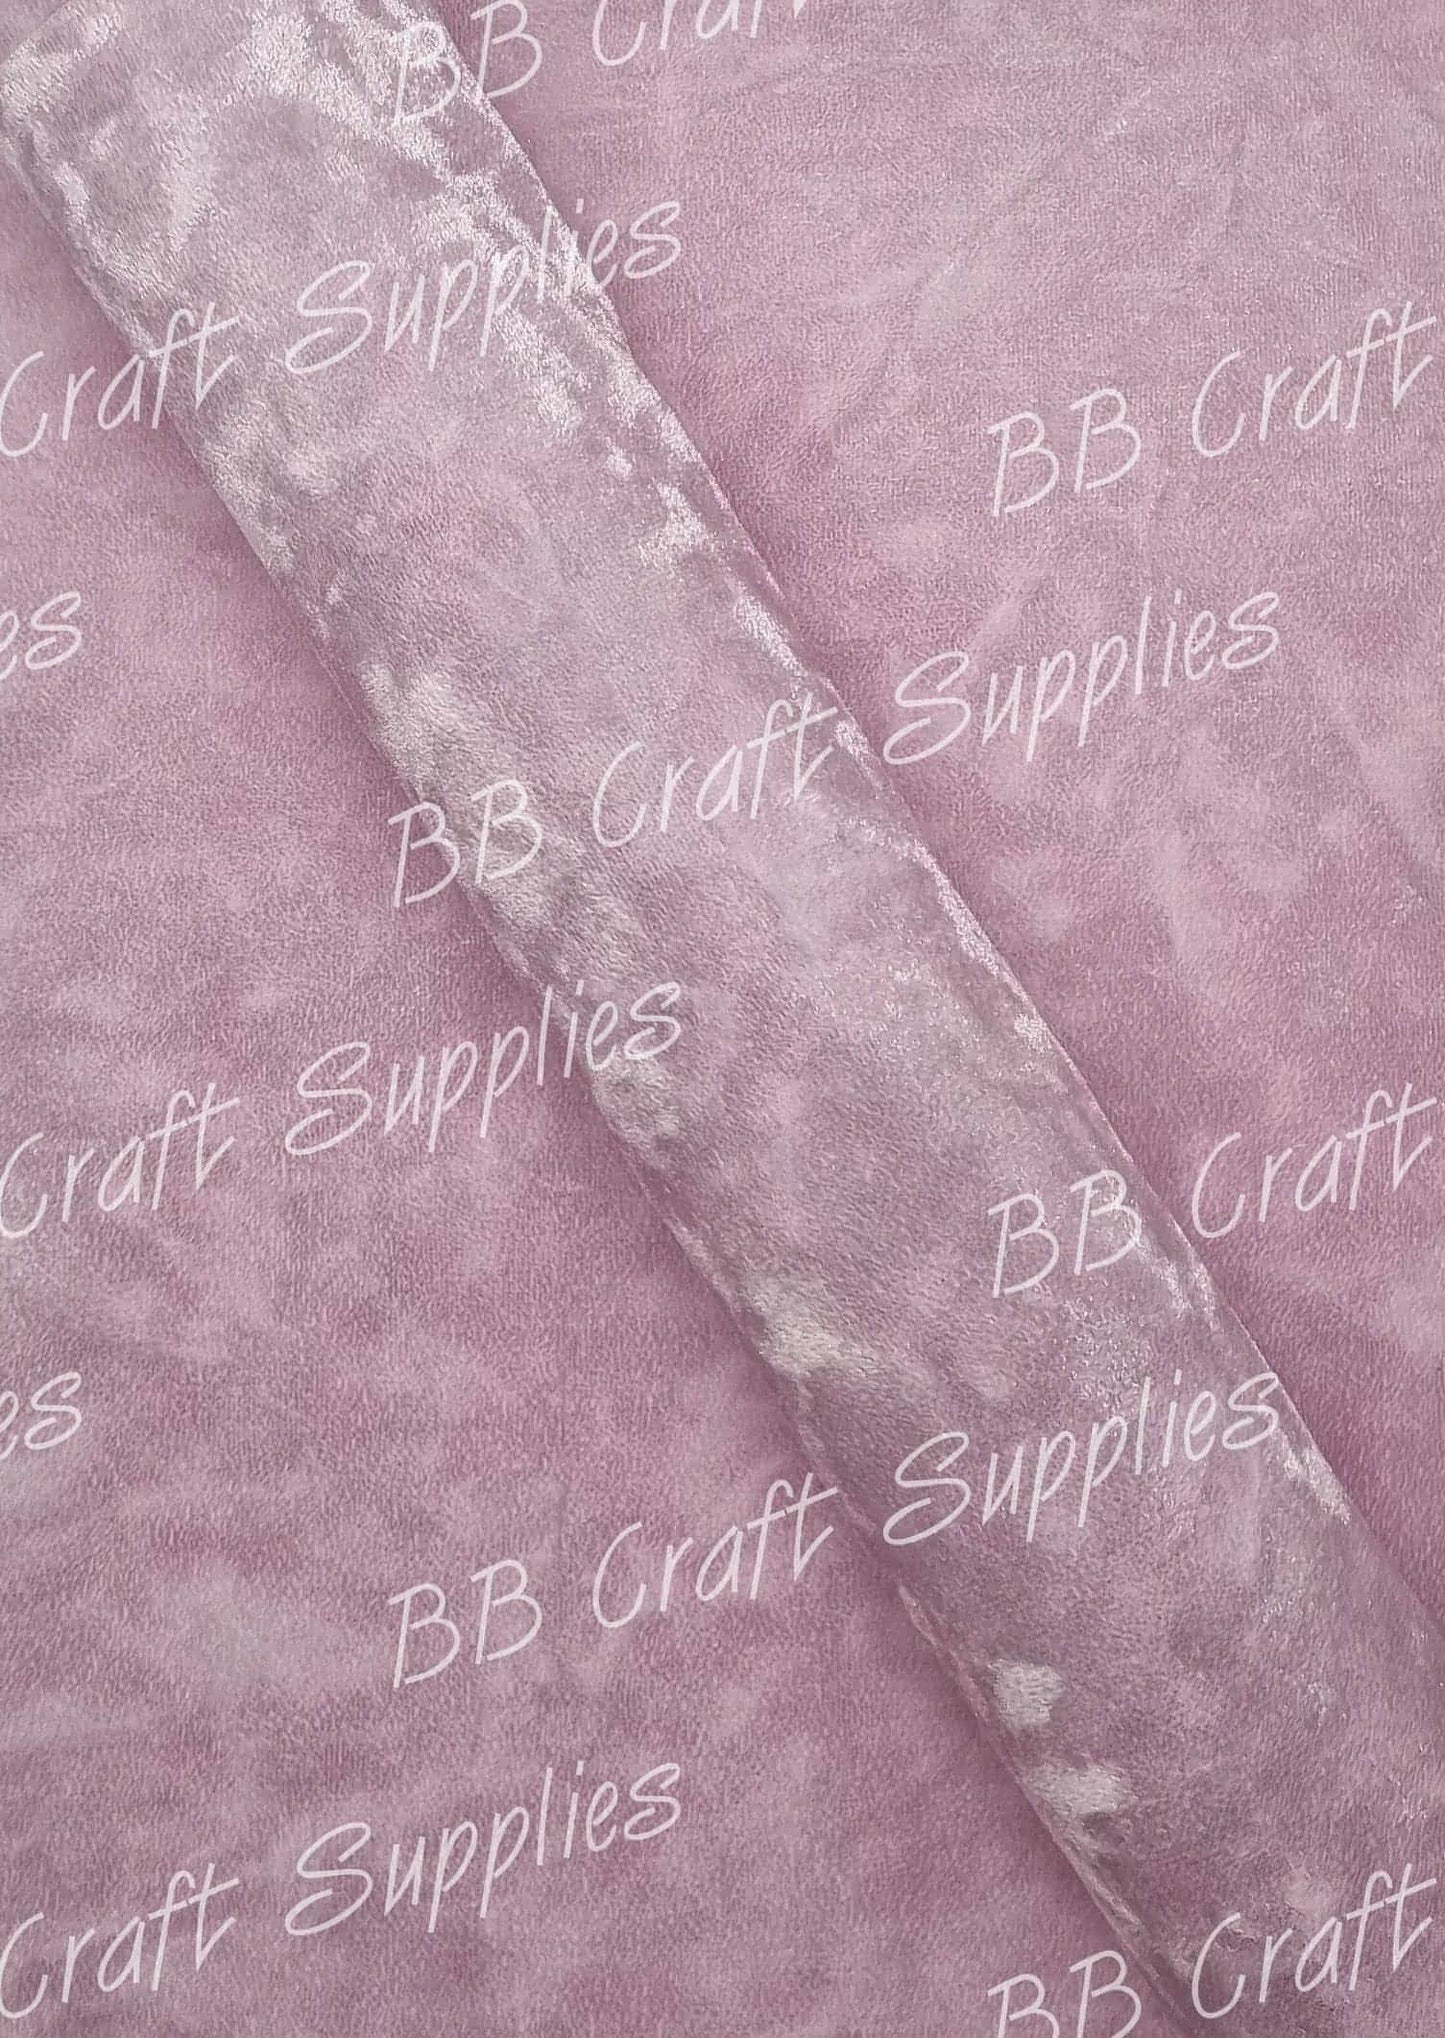 Soft Crushed Velvet Fabric - Pink - crushed, pink, soft, velvey - Bare Butler Faux Leather Supplies 